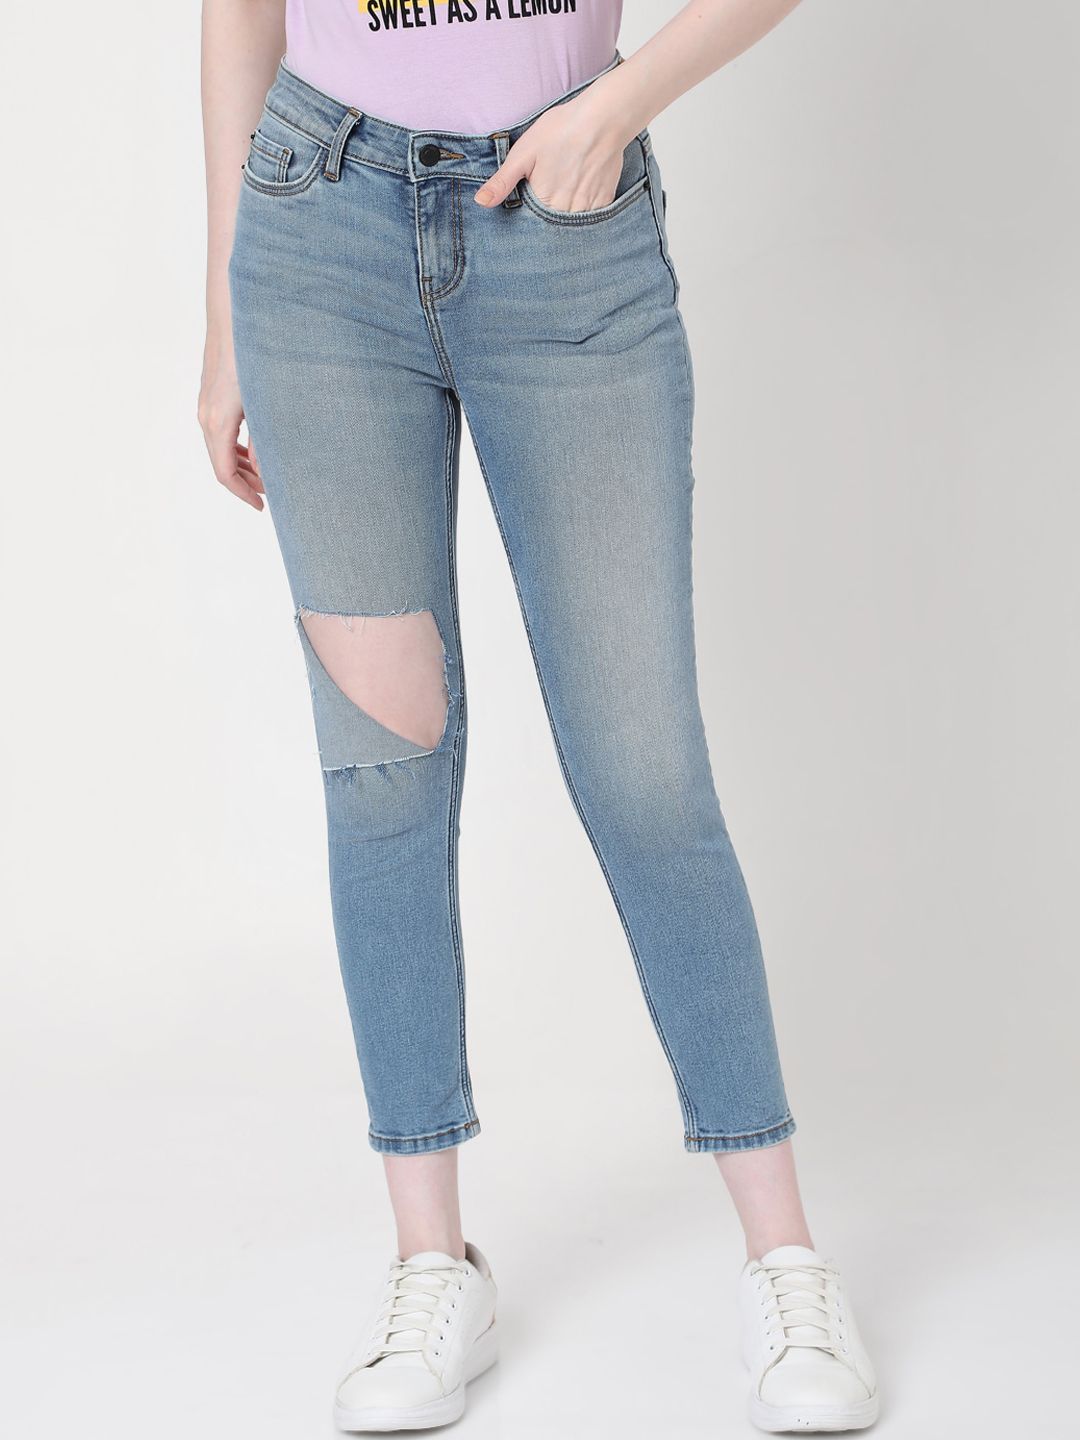 Vero Moda Women Blue Skinny Fit Low Distressed Light Fade Jeans Price in India